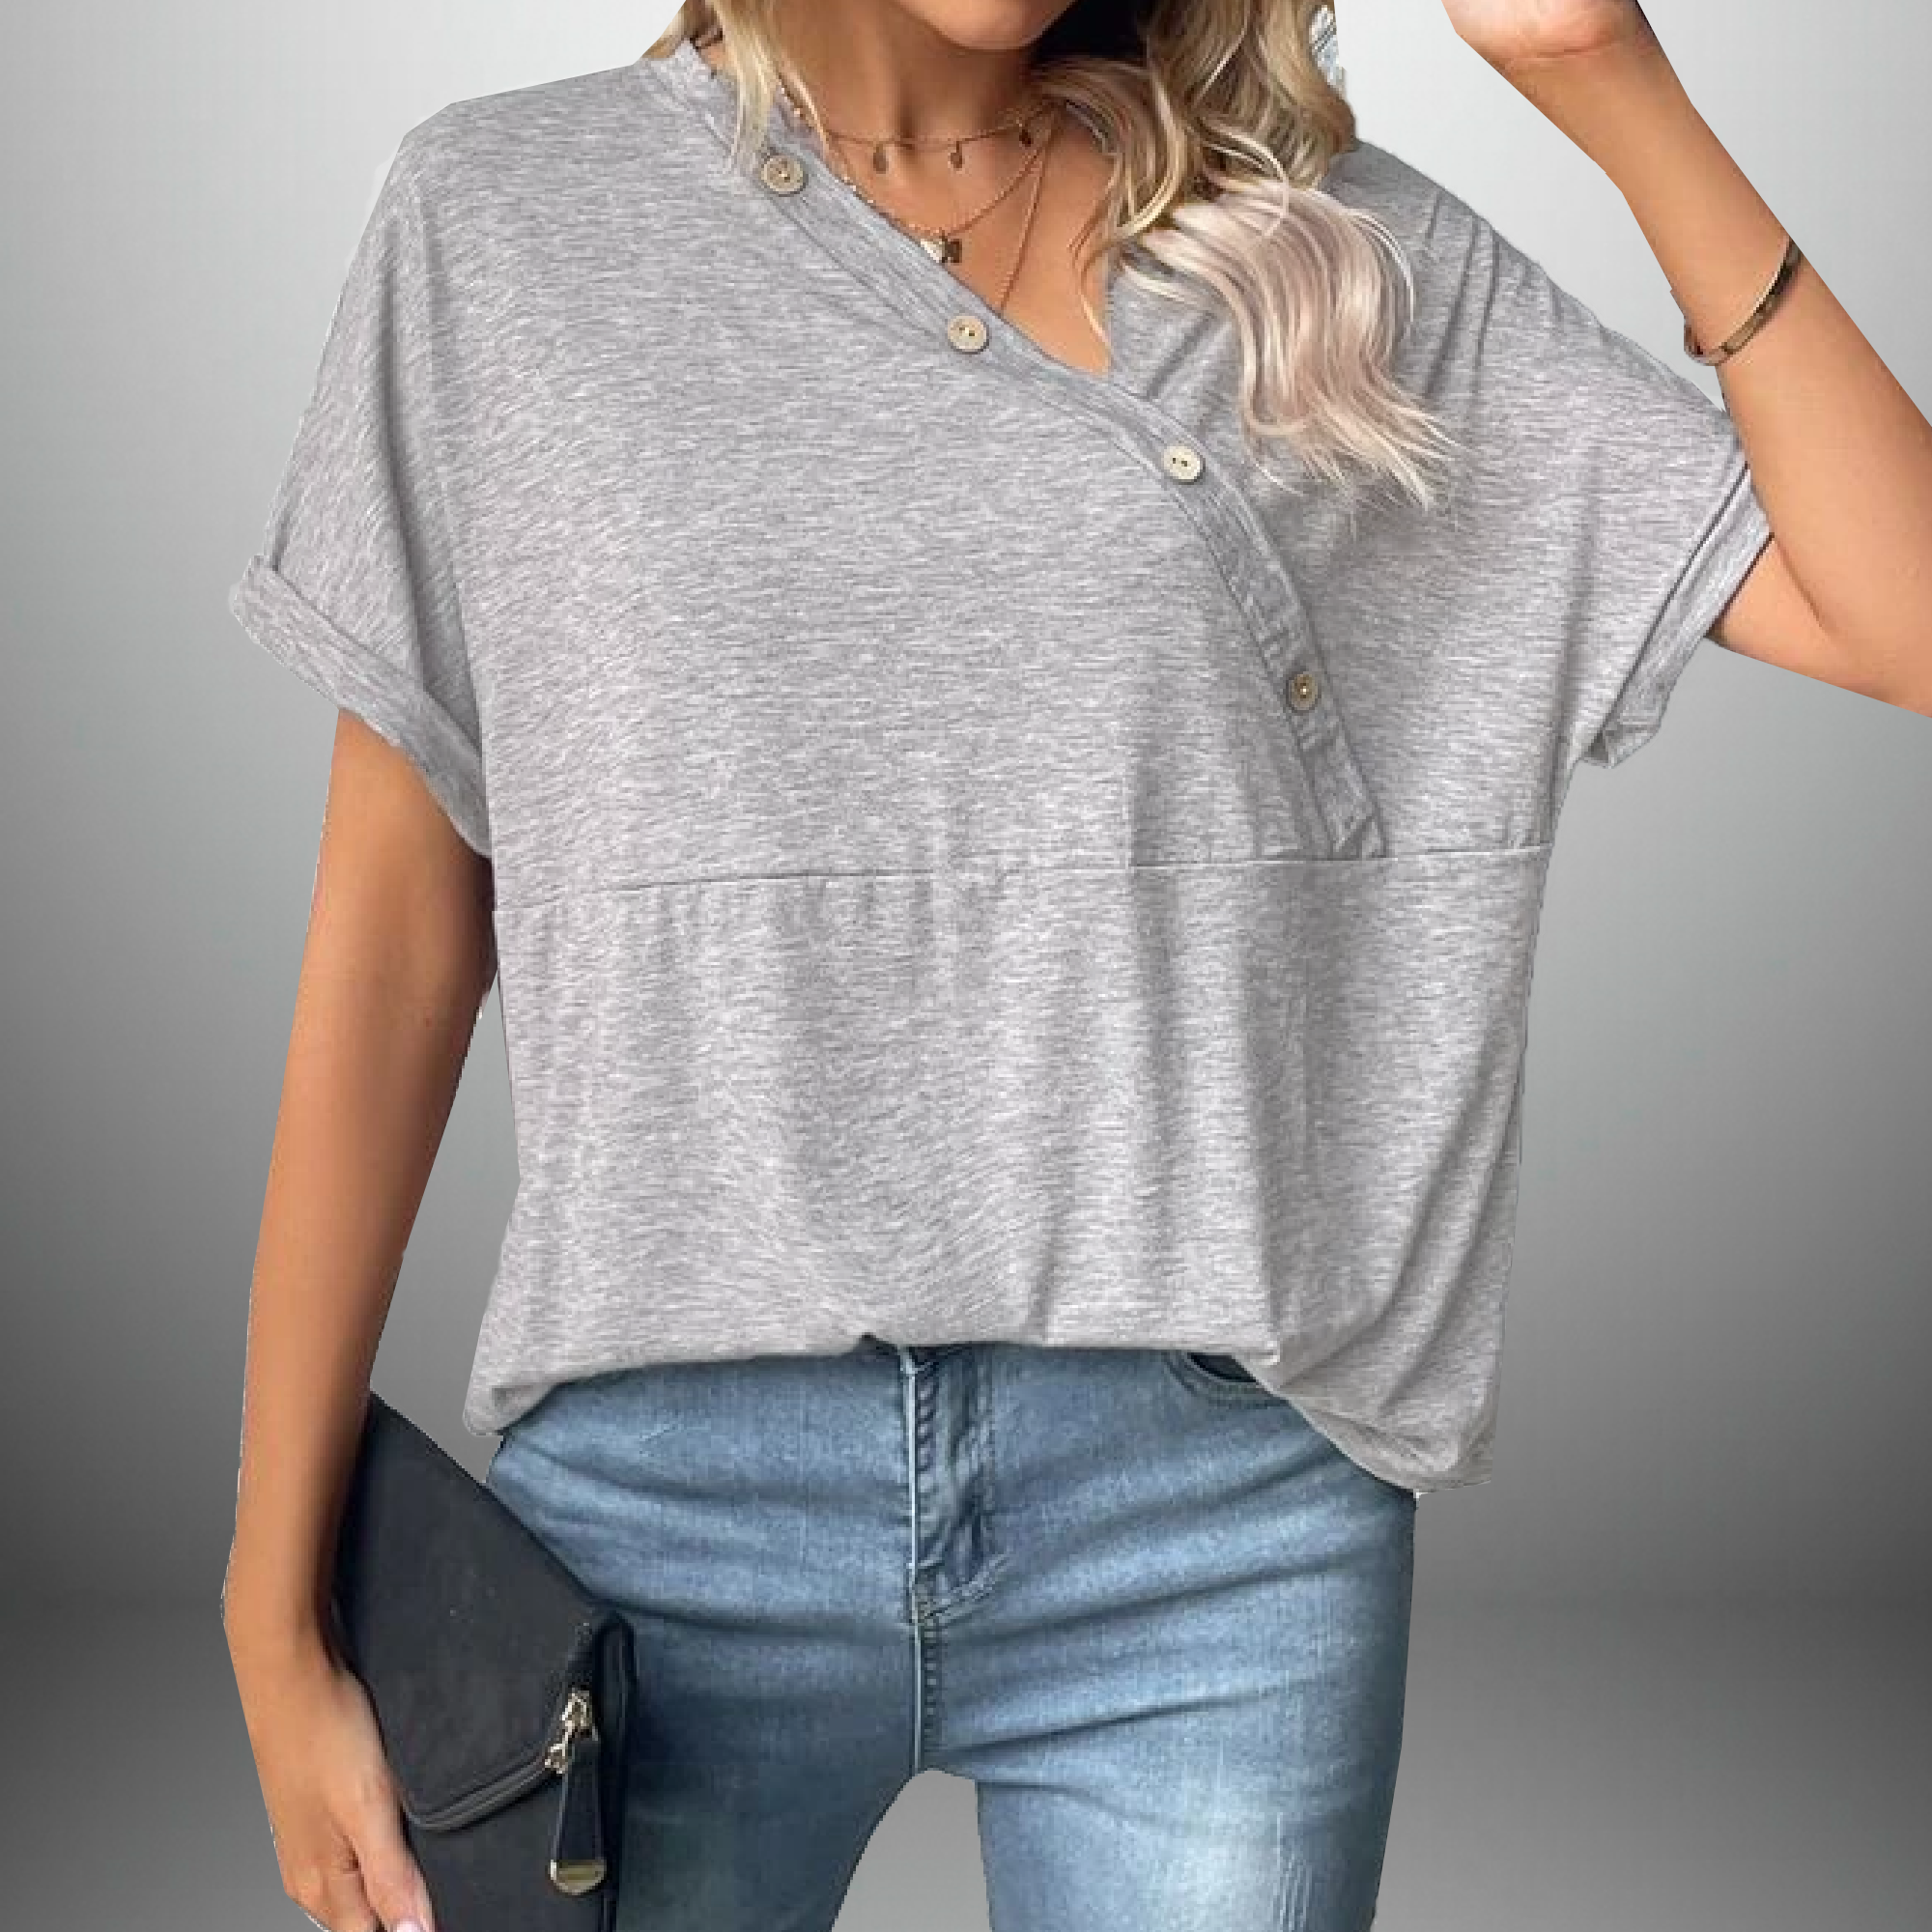 Women's Solid Grey Top With Decorative Buttons- RKTW007